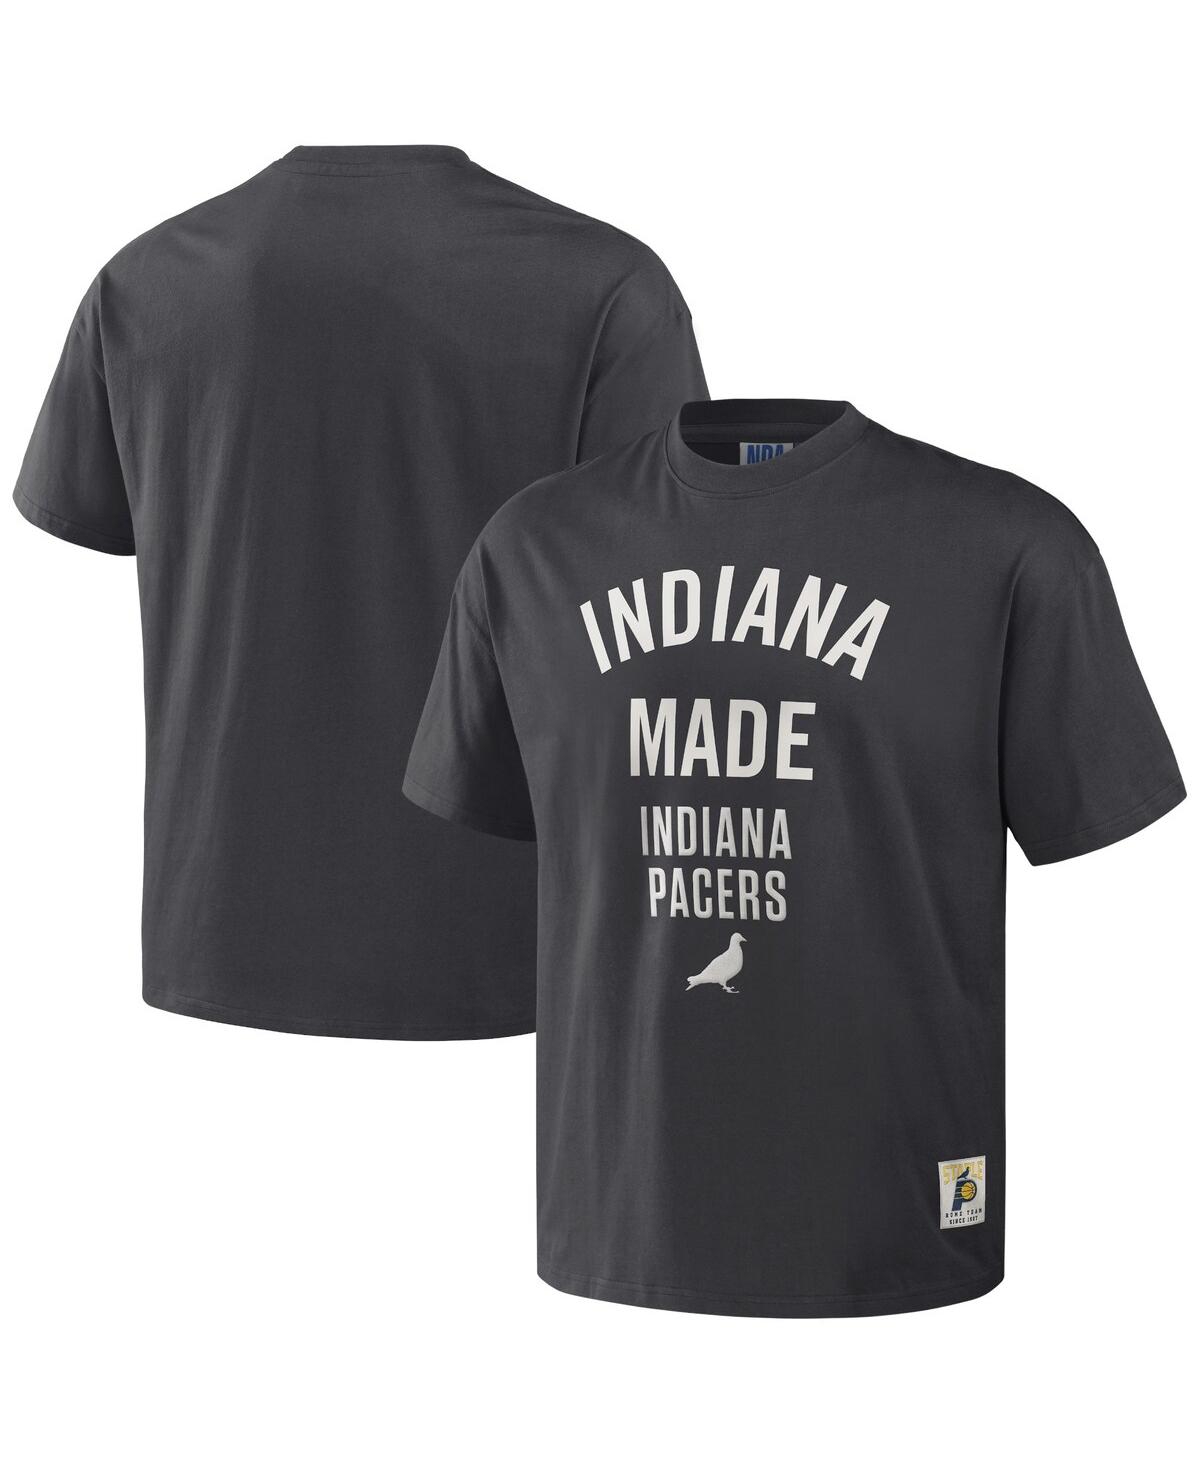 Men's Nba x Staple Anthracite Indiana Pacers Heavyweight Oversized T-shirt - Anthracite